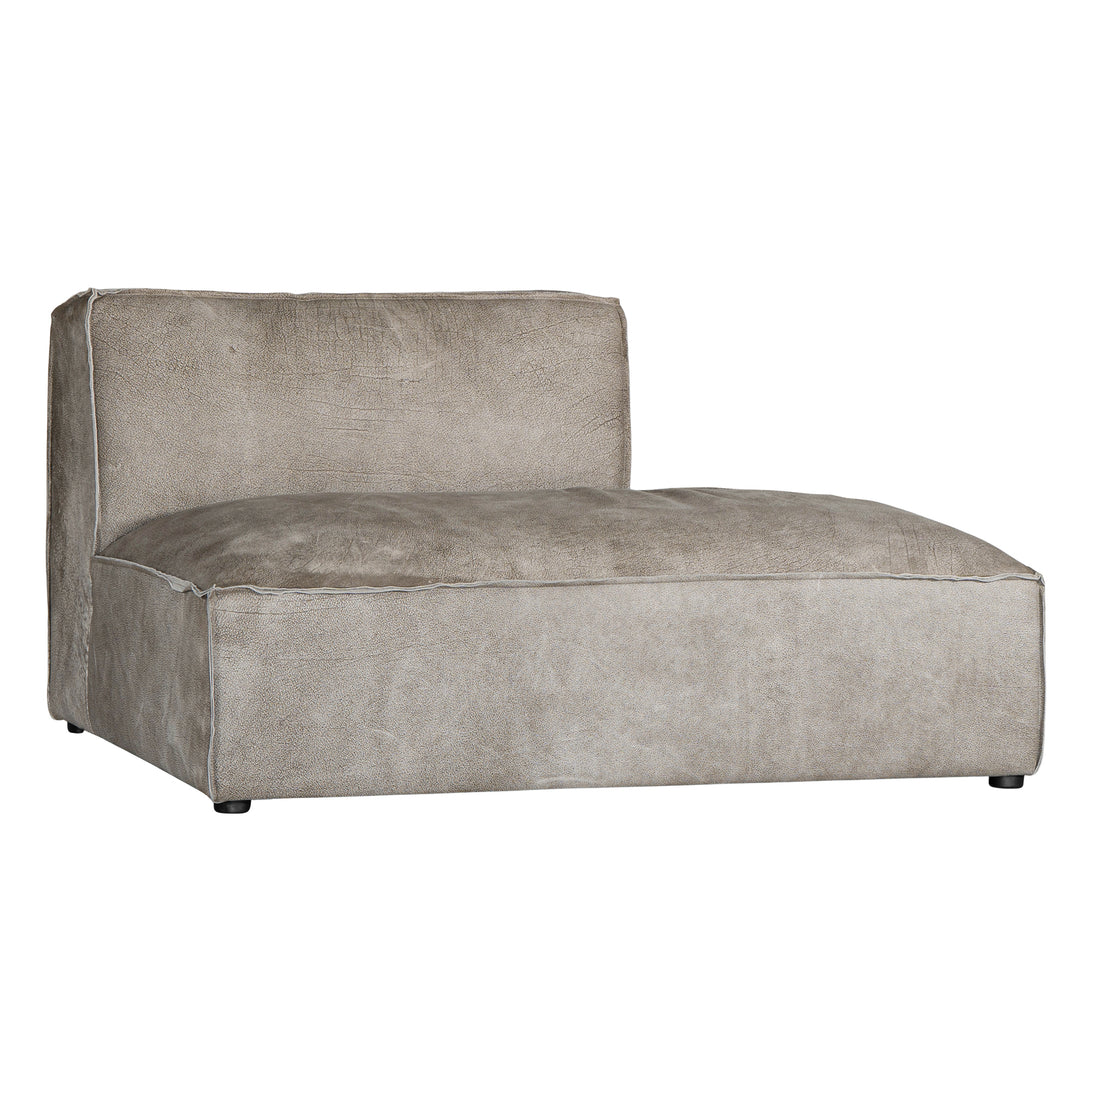 Manson Sofa | Right Hand Side Chaise